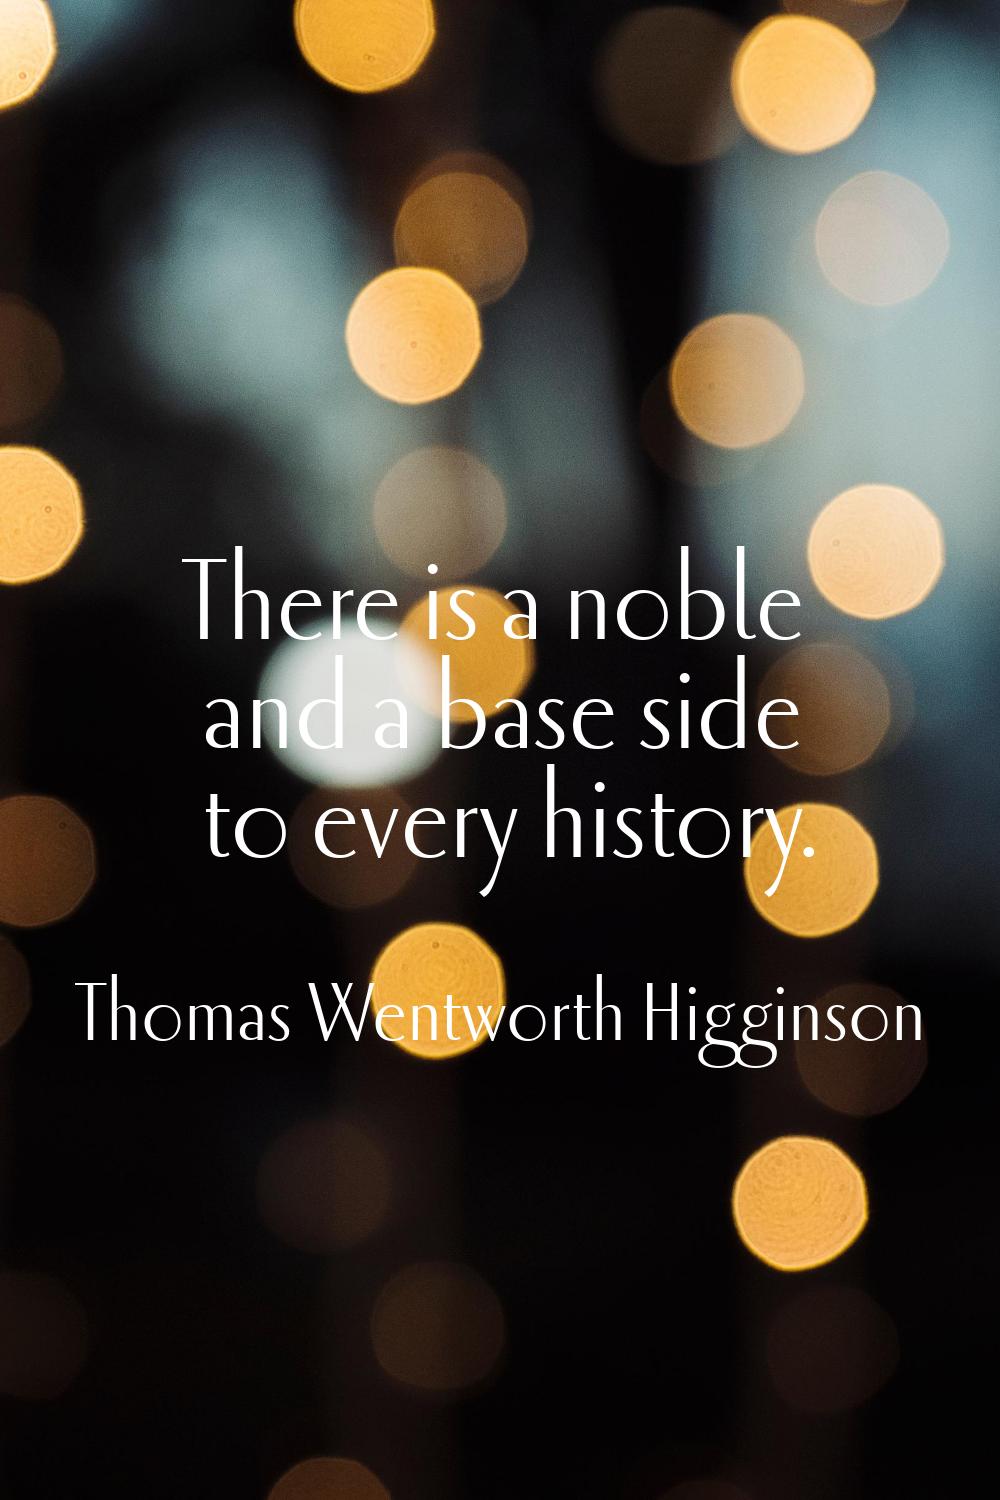 There is a noble and a base side to every history.